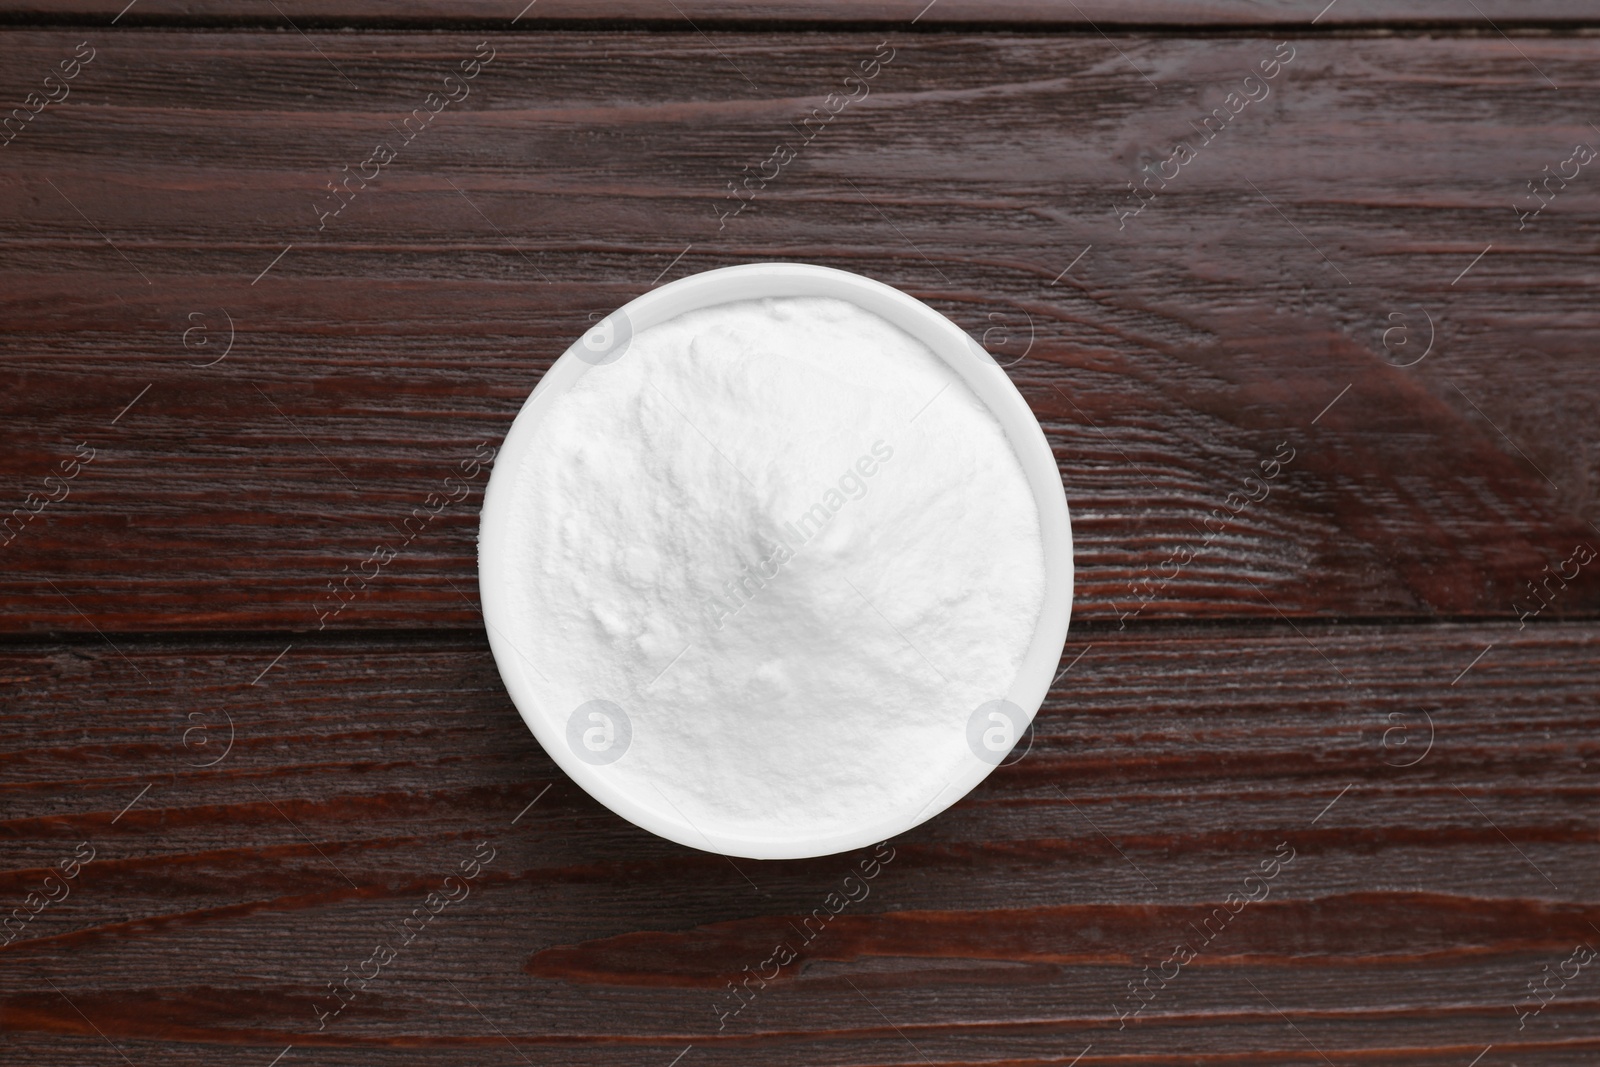 Photo of Bowl of sweet powdered fructose on black wooden table, top view